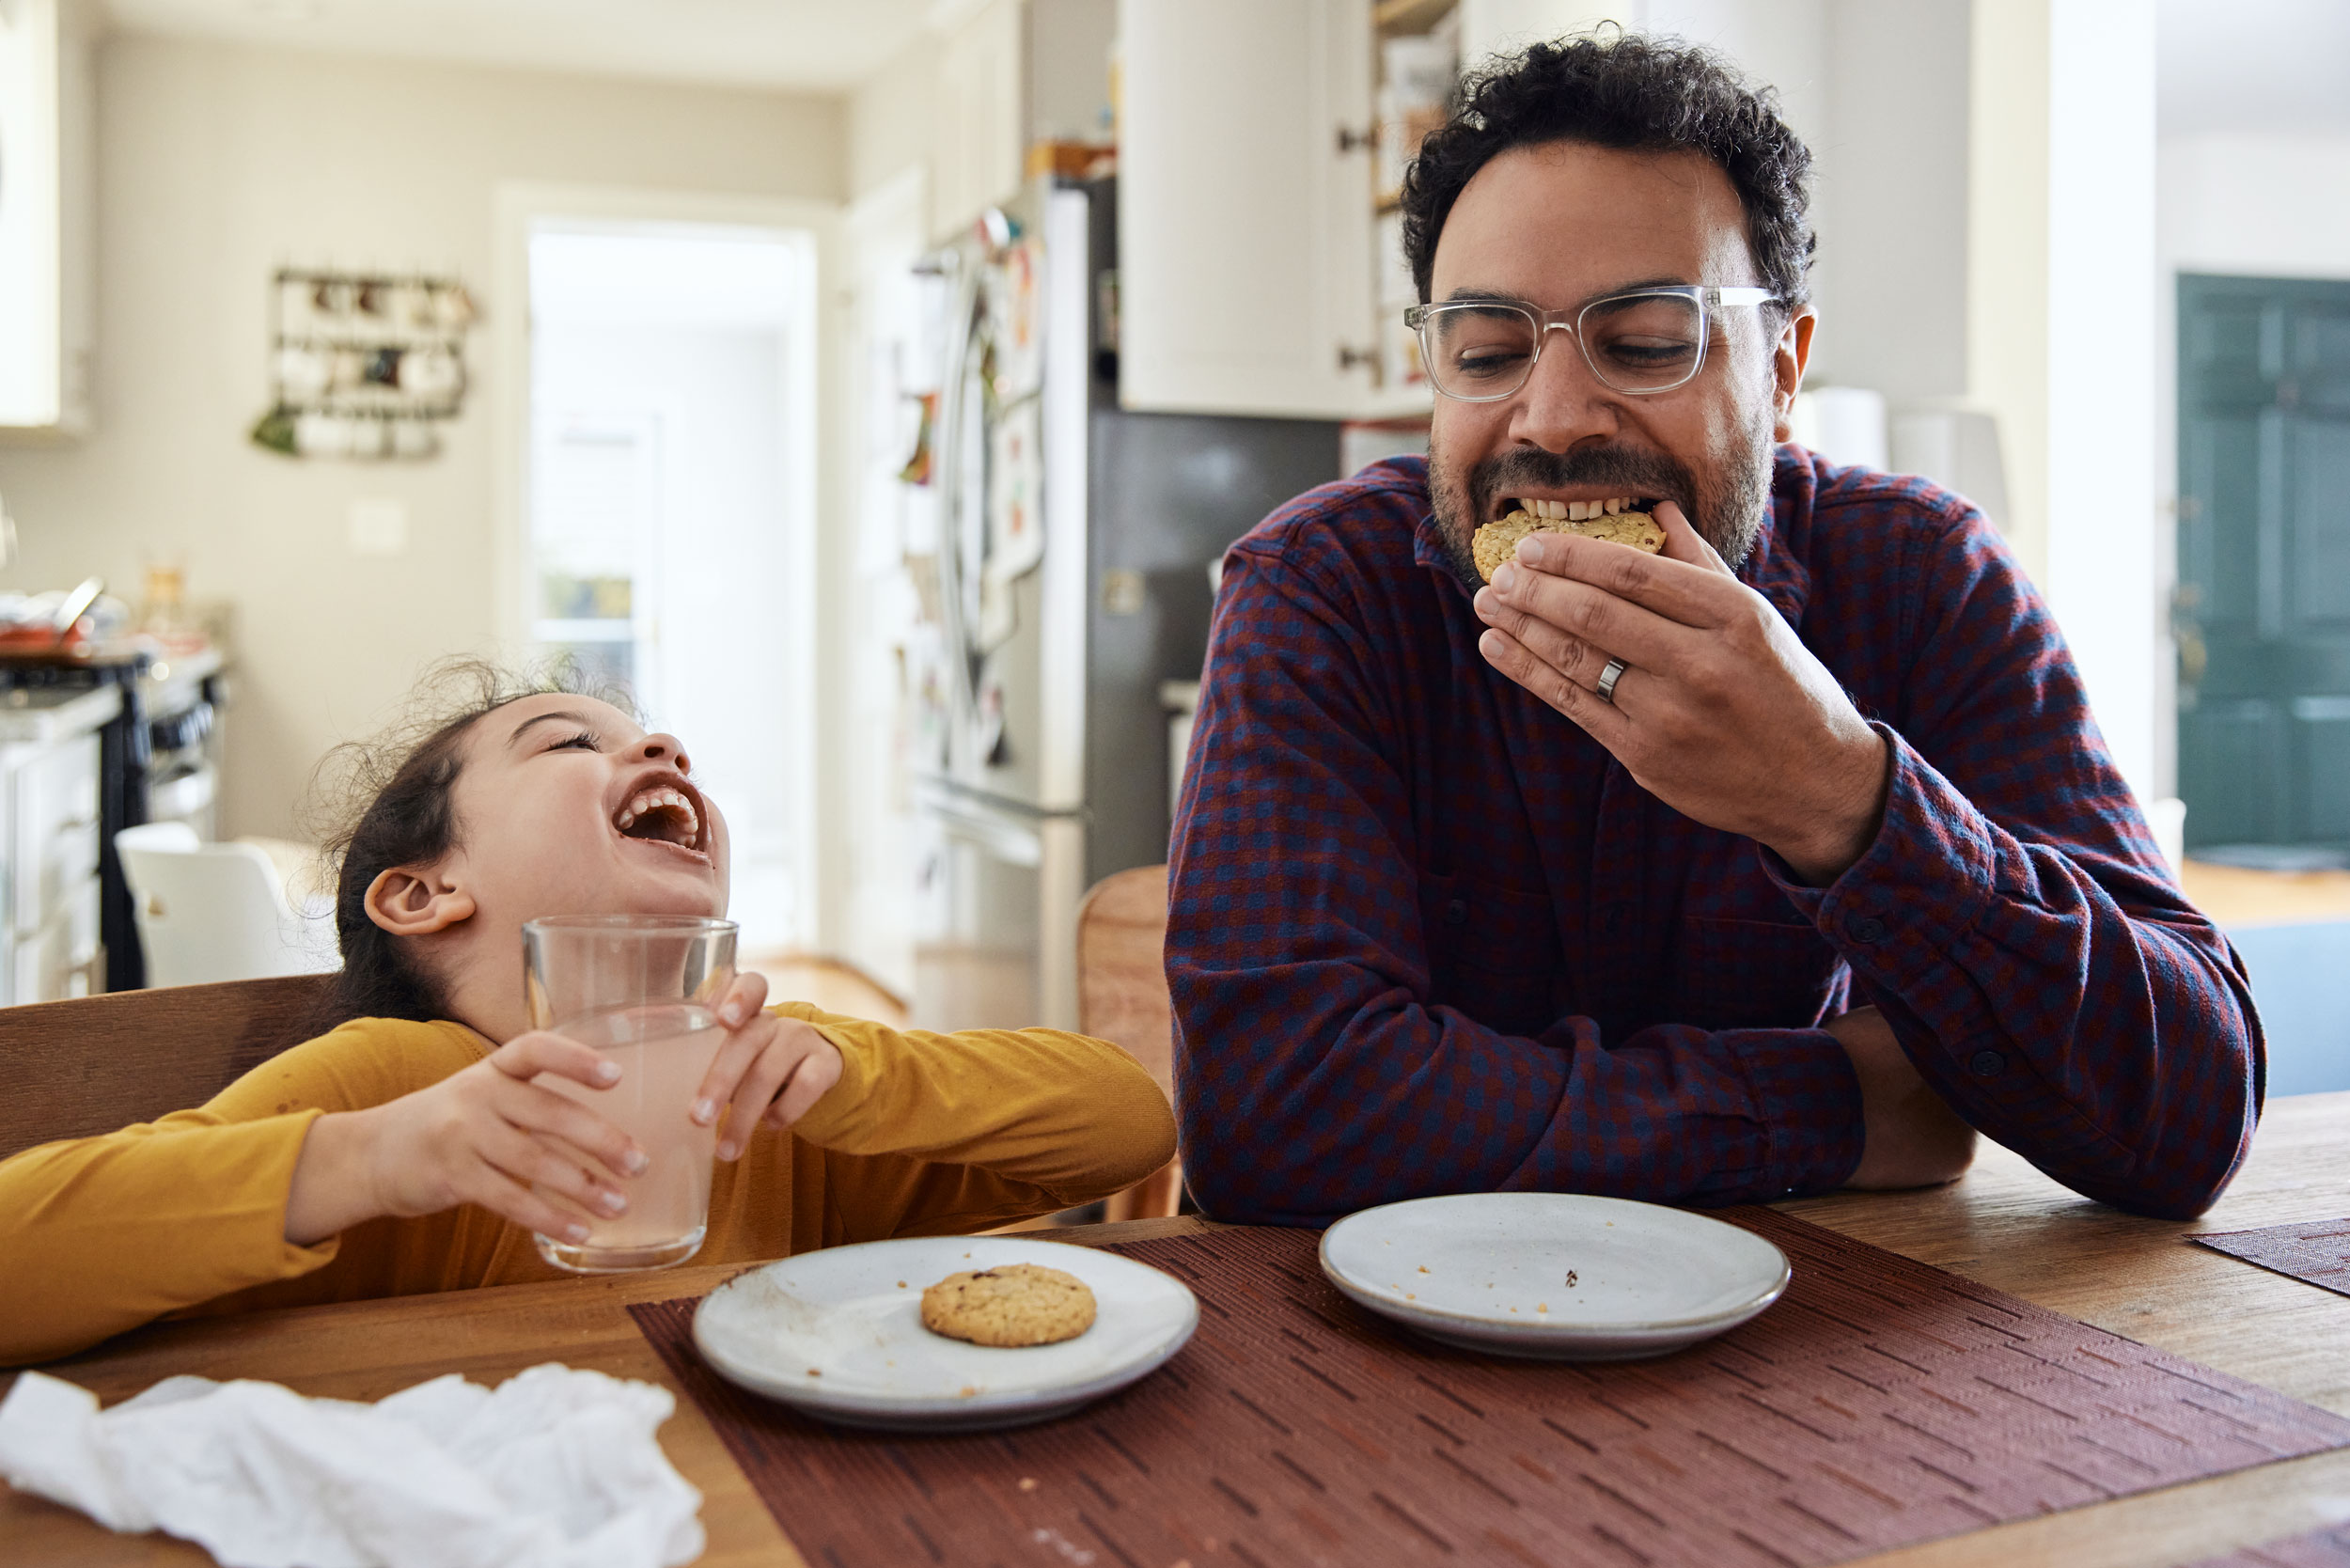 dad-daughter-eating-cookies-laughing-nyc-authentic-commercial-photography